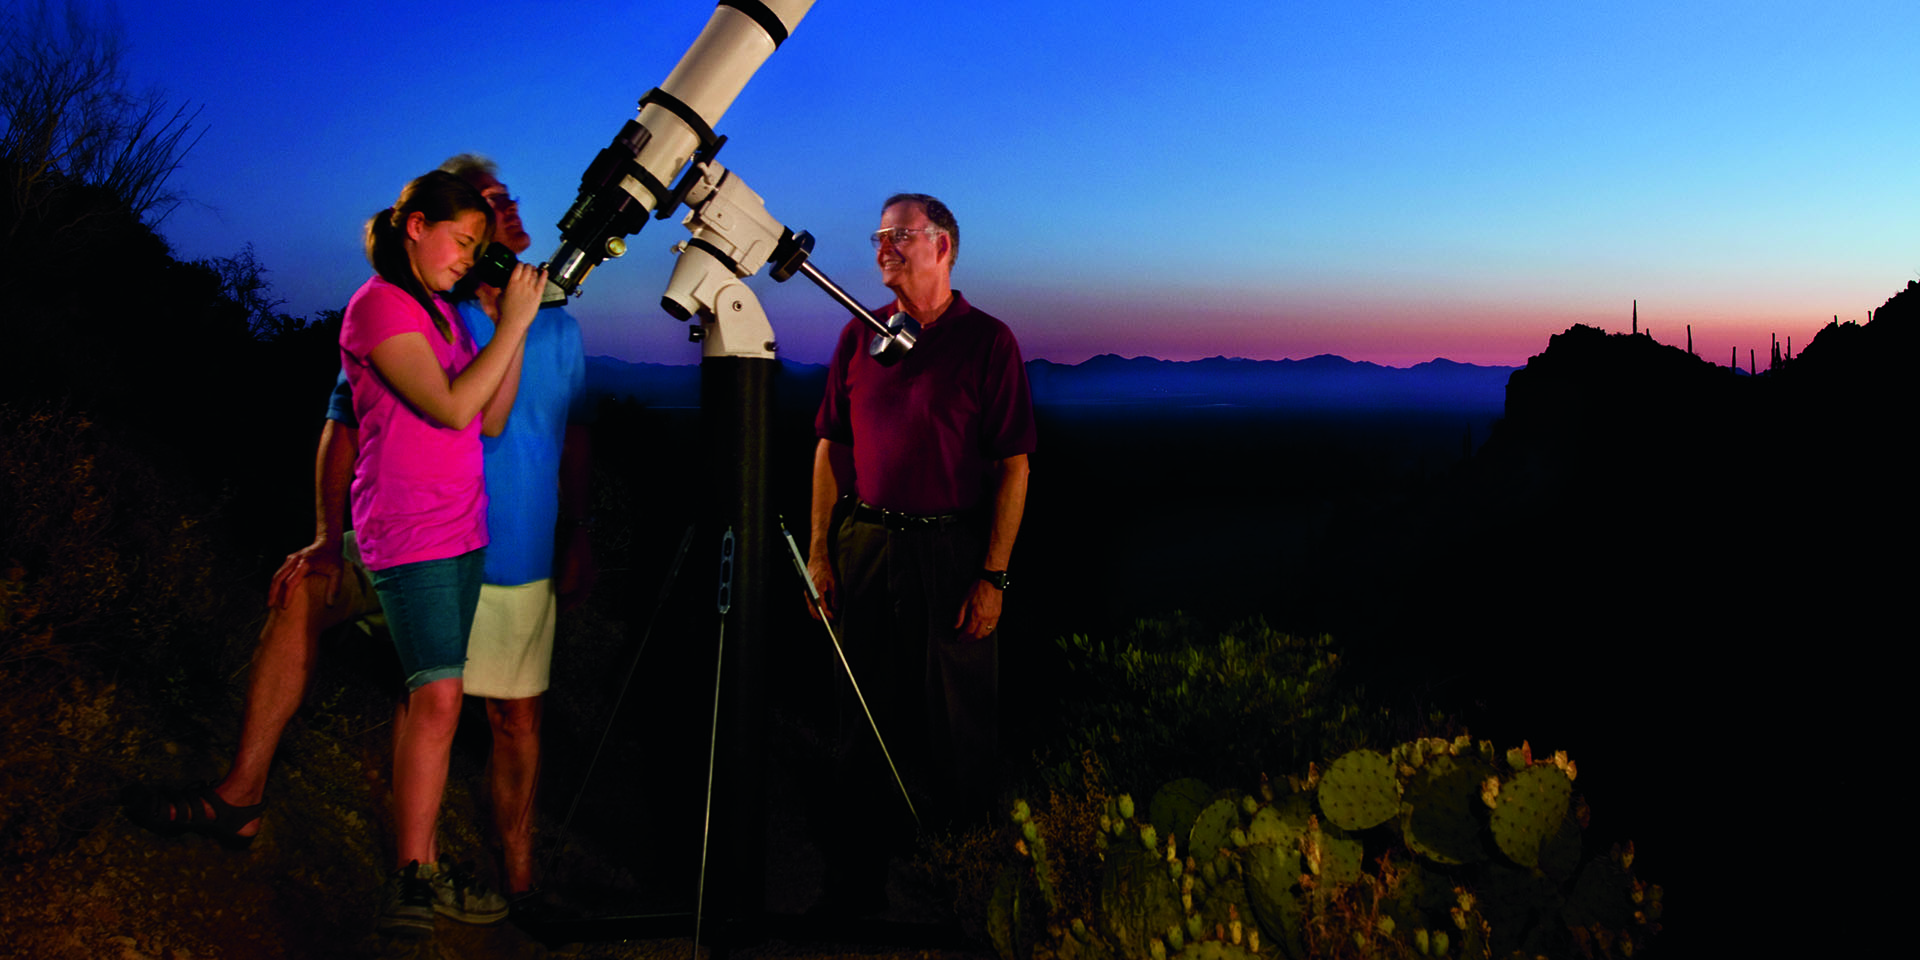 The Ritz-Carlton, Rancho Mirage hosts complimentary stargazing sessions every Saturday evening 